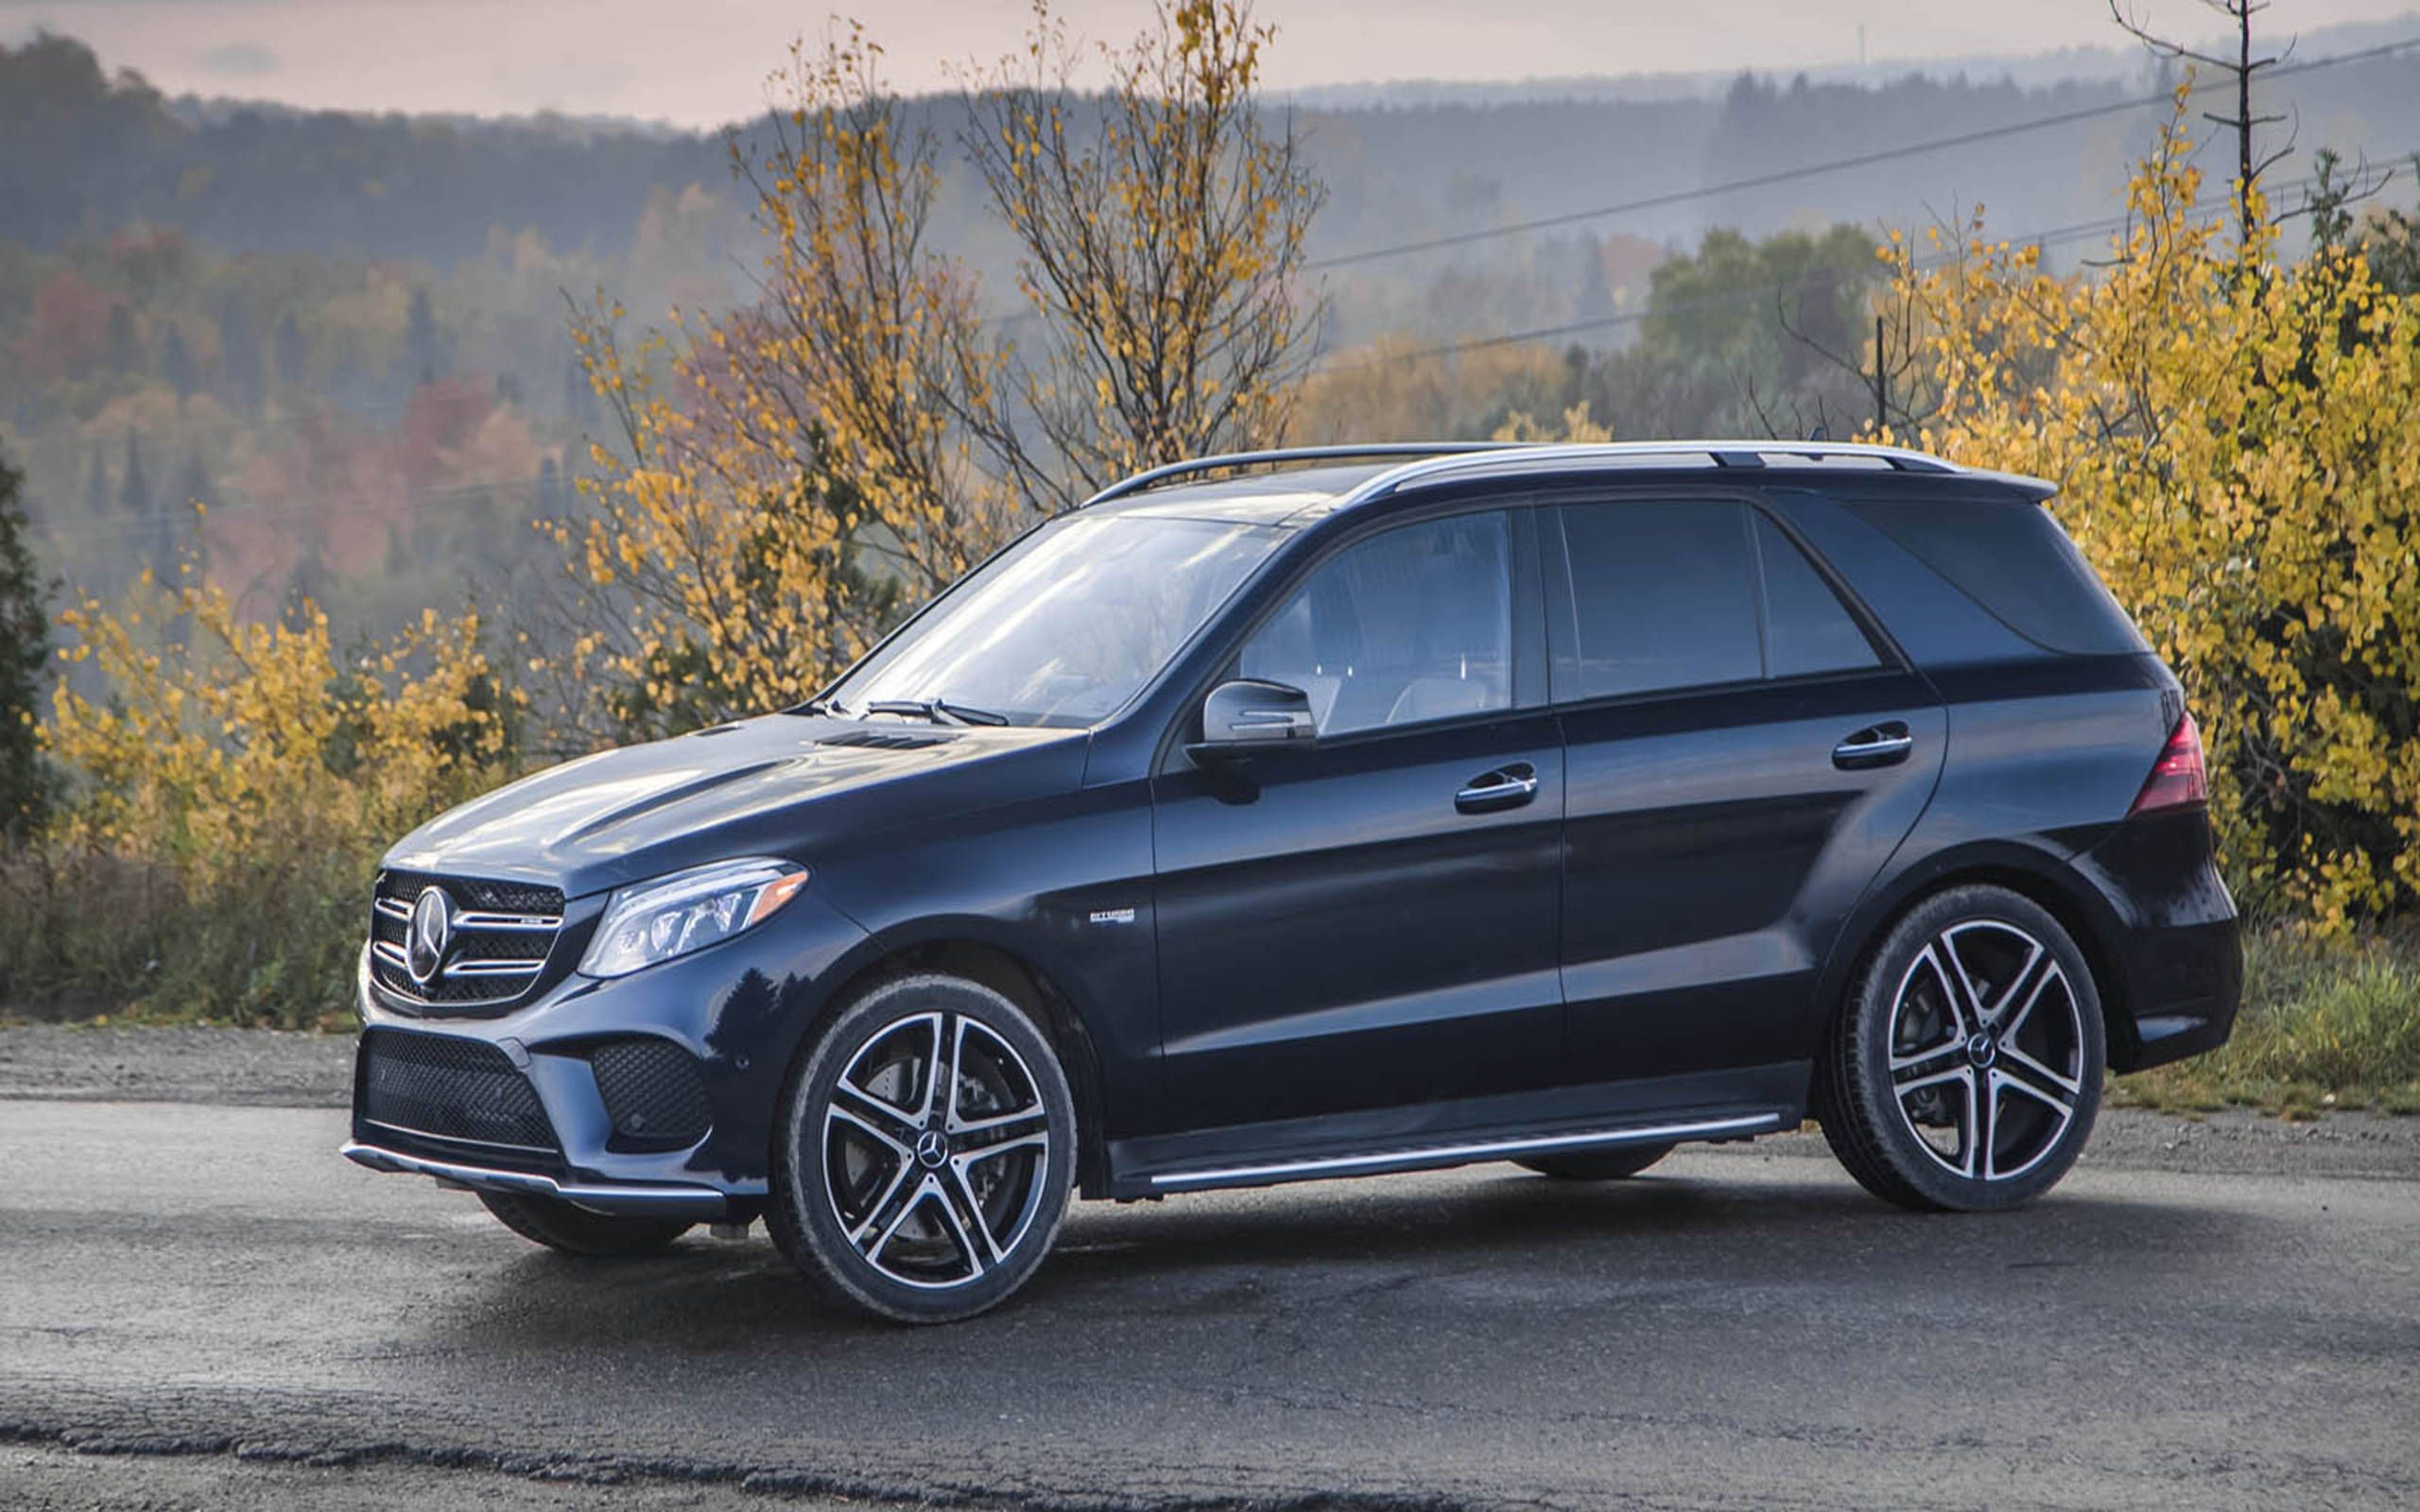 Mercedes-AMG GLE43 SUV replaces GLE400 in AMG's blitz